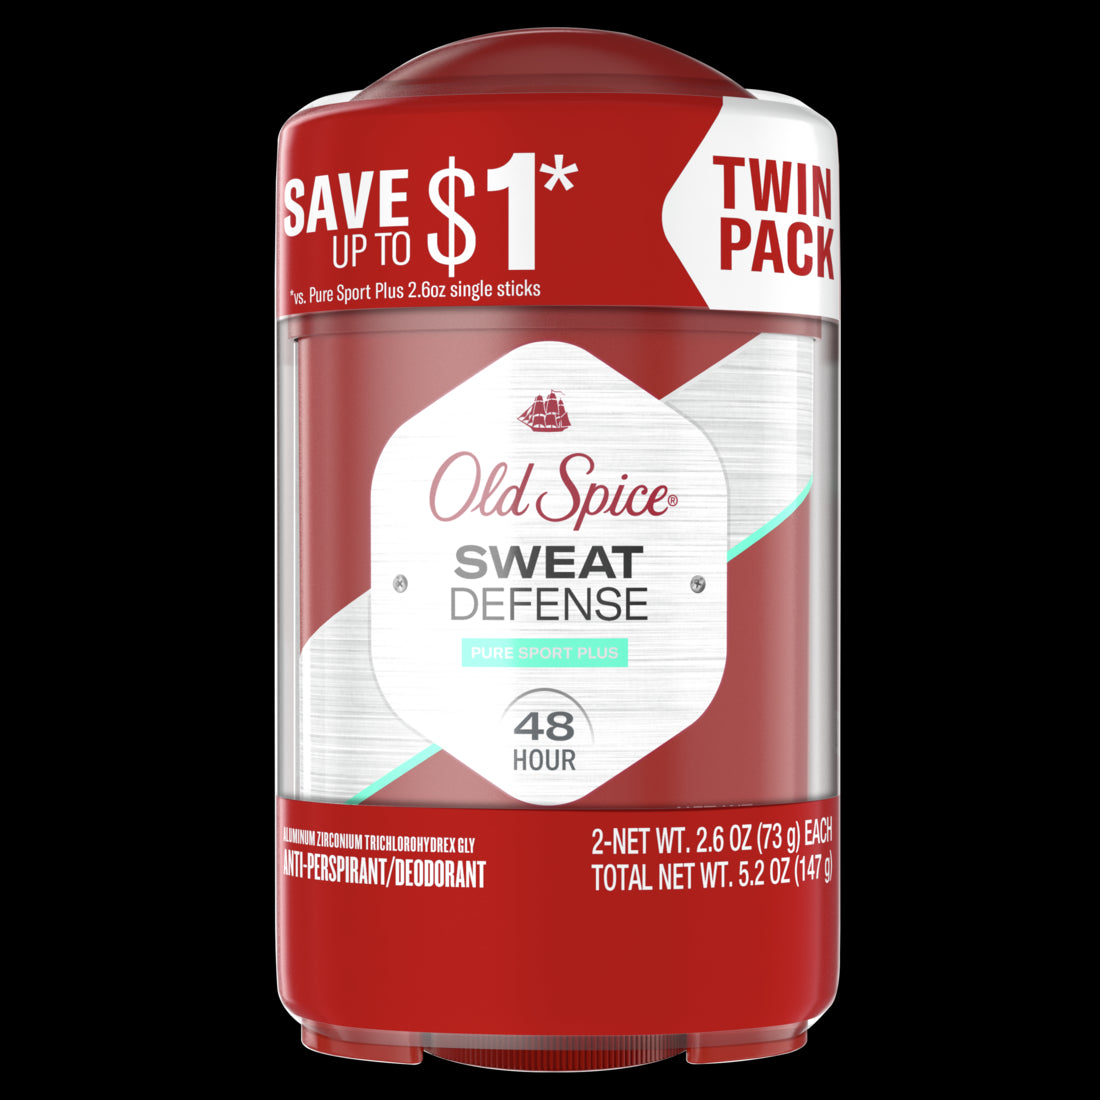 Old Spice Men's Antiperspirant & Deodorant Sweat Defense Pure Sport Plus Soft Solid, 2.6oz, Pack of Two